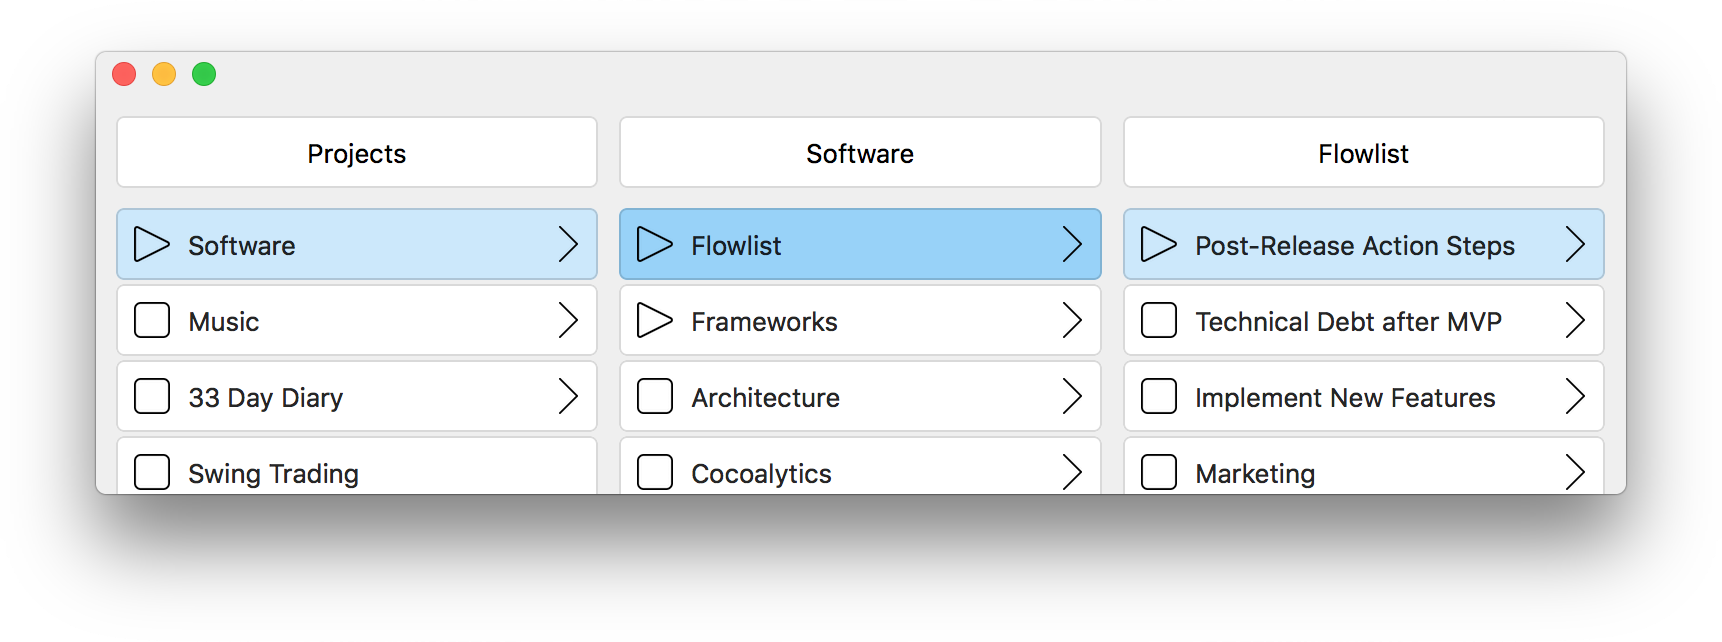 Hierarchical Items Can Express Many Levels of Detail. task management, task, app, flow, todo list, flowlist, task list, omnifocus, wunderlist, todoist, focus, trello, agenda, agile, kanban, productivity, apple, mac, macos, ios, osx, self management, project management, organizer, getting things done, getting shit done, note taking, brainstorming, creative writing, hierarchical data